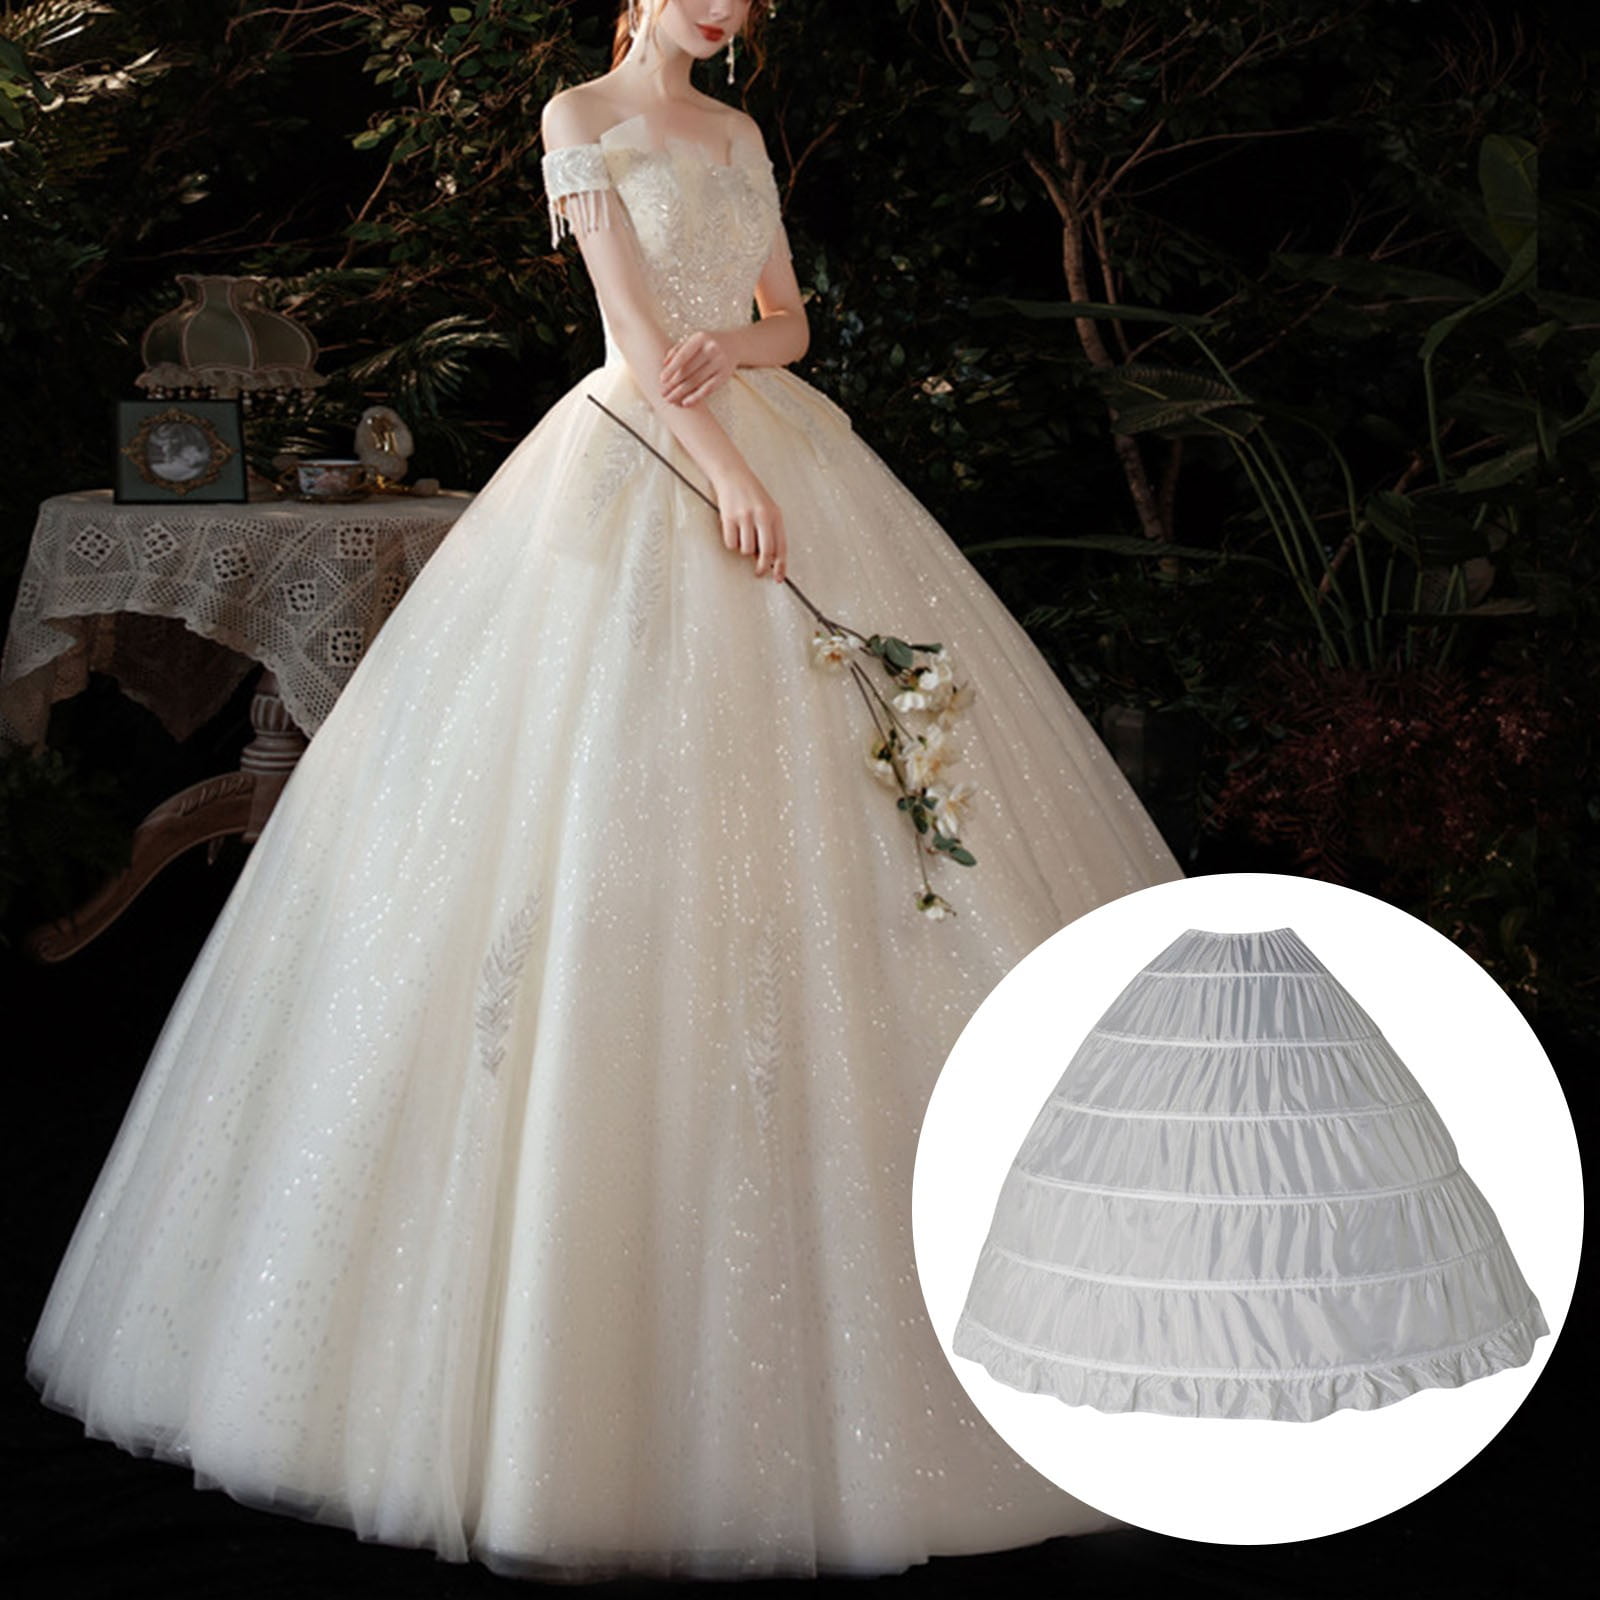 Wedding Dress Long Petticoat Dress 4 Hoops, 5 Layers, Puffy Crinoline  Underskirt For Ball Gowns And Accessories From Formaldresses1108, $17.09 |  DHgate.Com